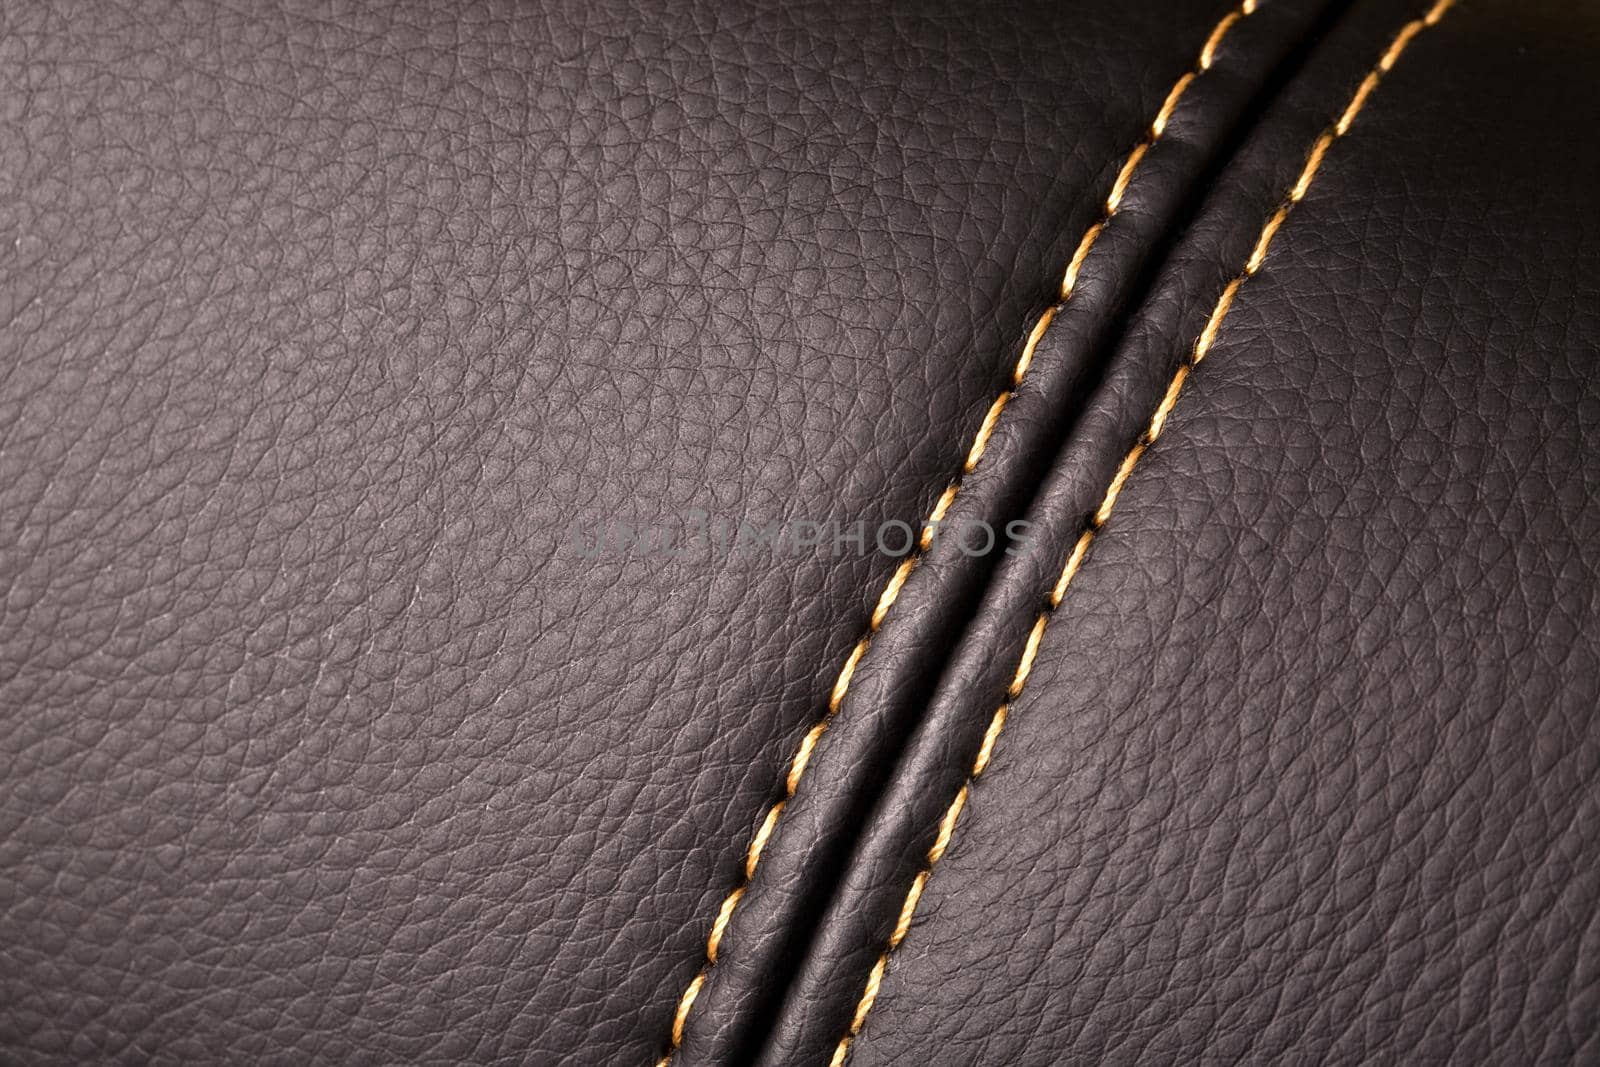 Seam on leather product (close up)